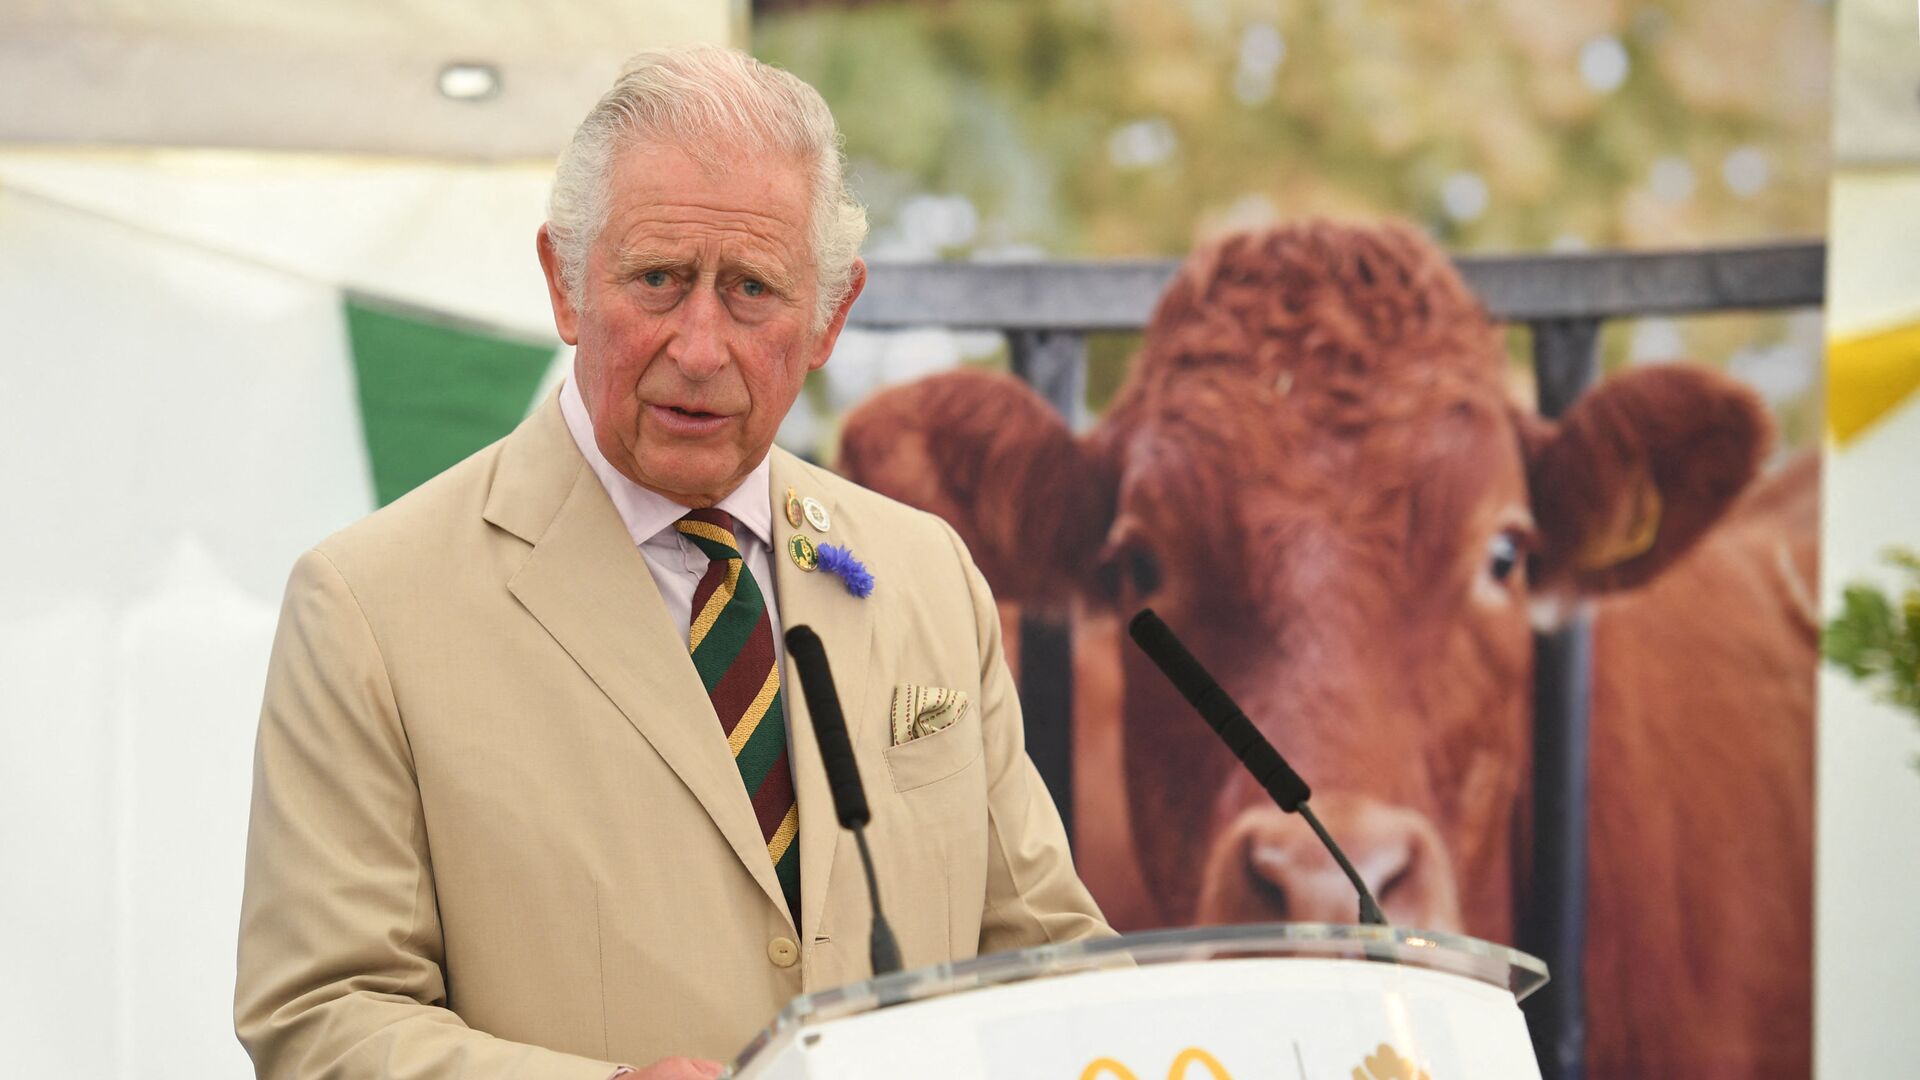 Britain's Prince Charles, Prince of Wales makes a speech during his visit to the Great Yorkshire Show in Harrogate, northern England on July 15, 2021. - Sputnik International, 1920, 11.10.2021